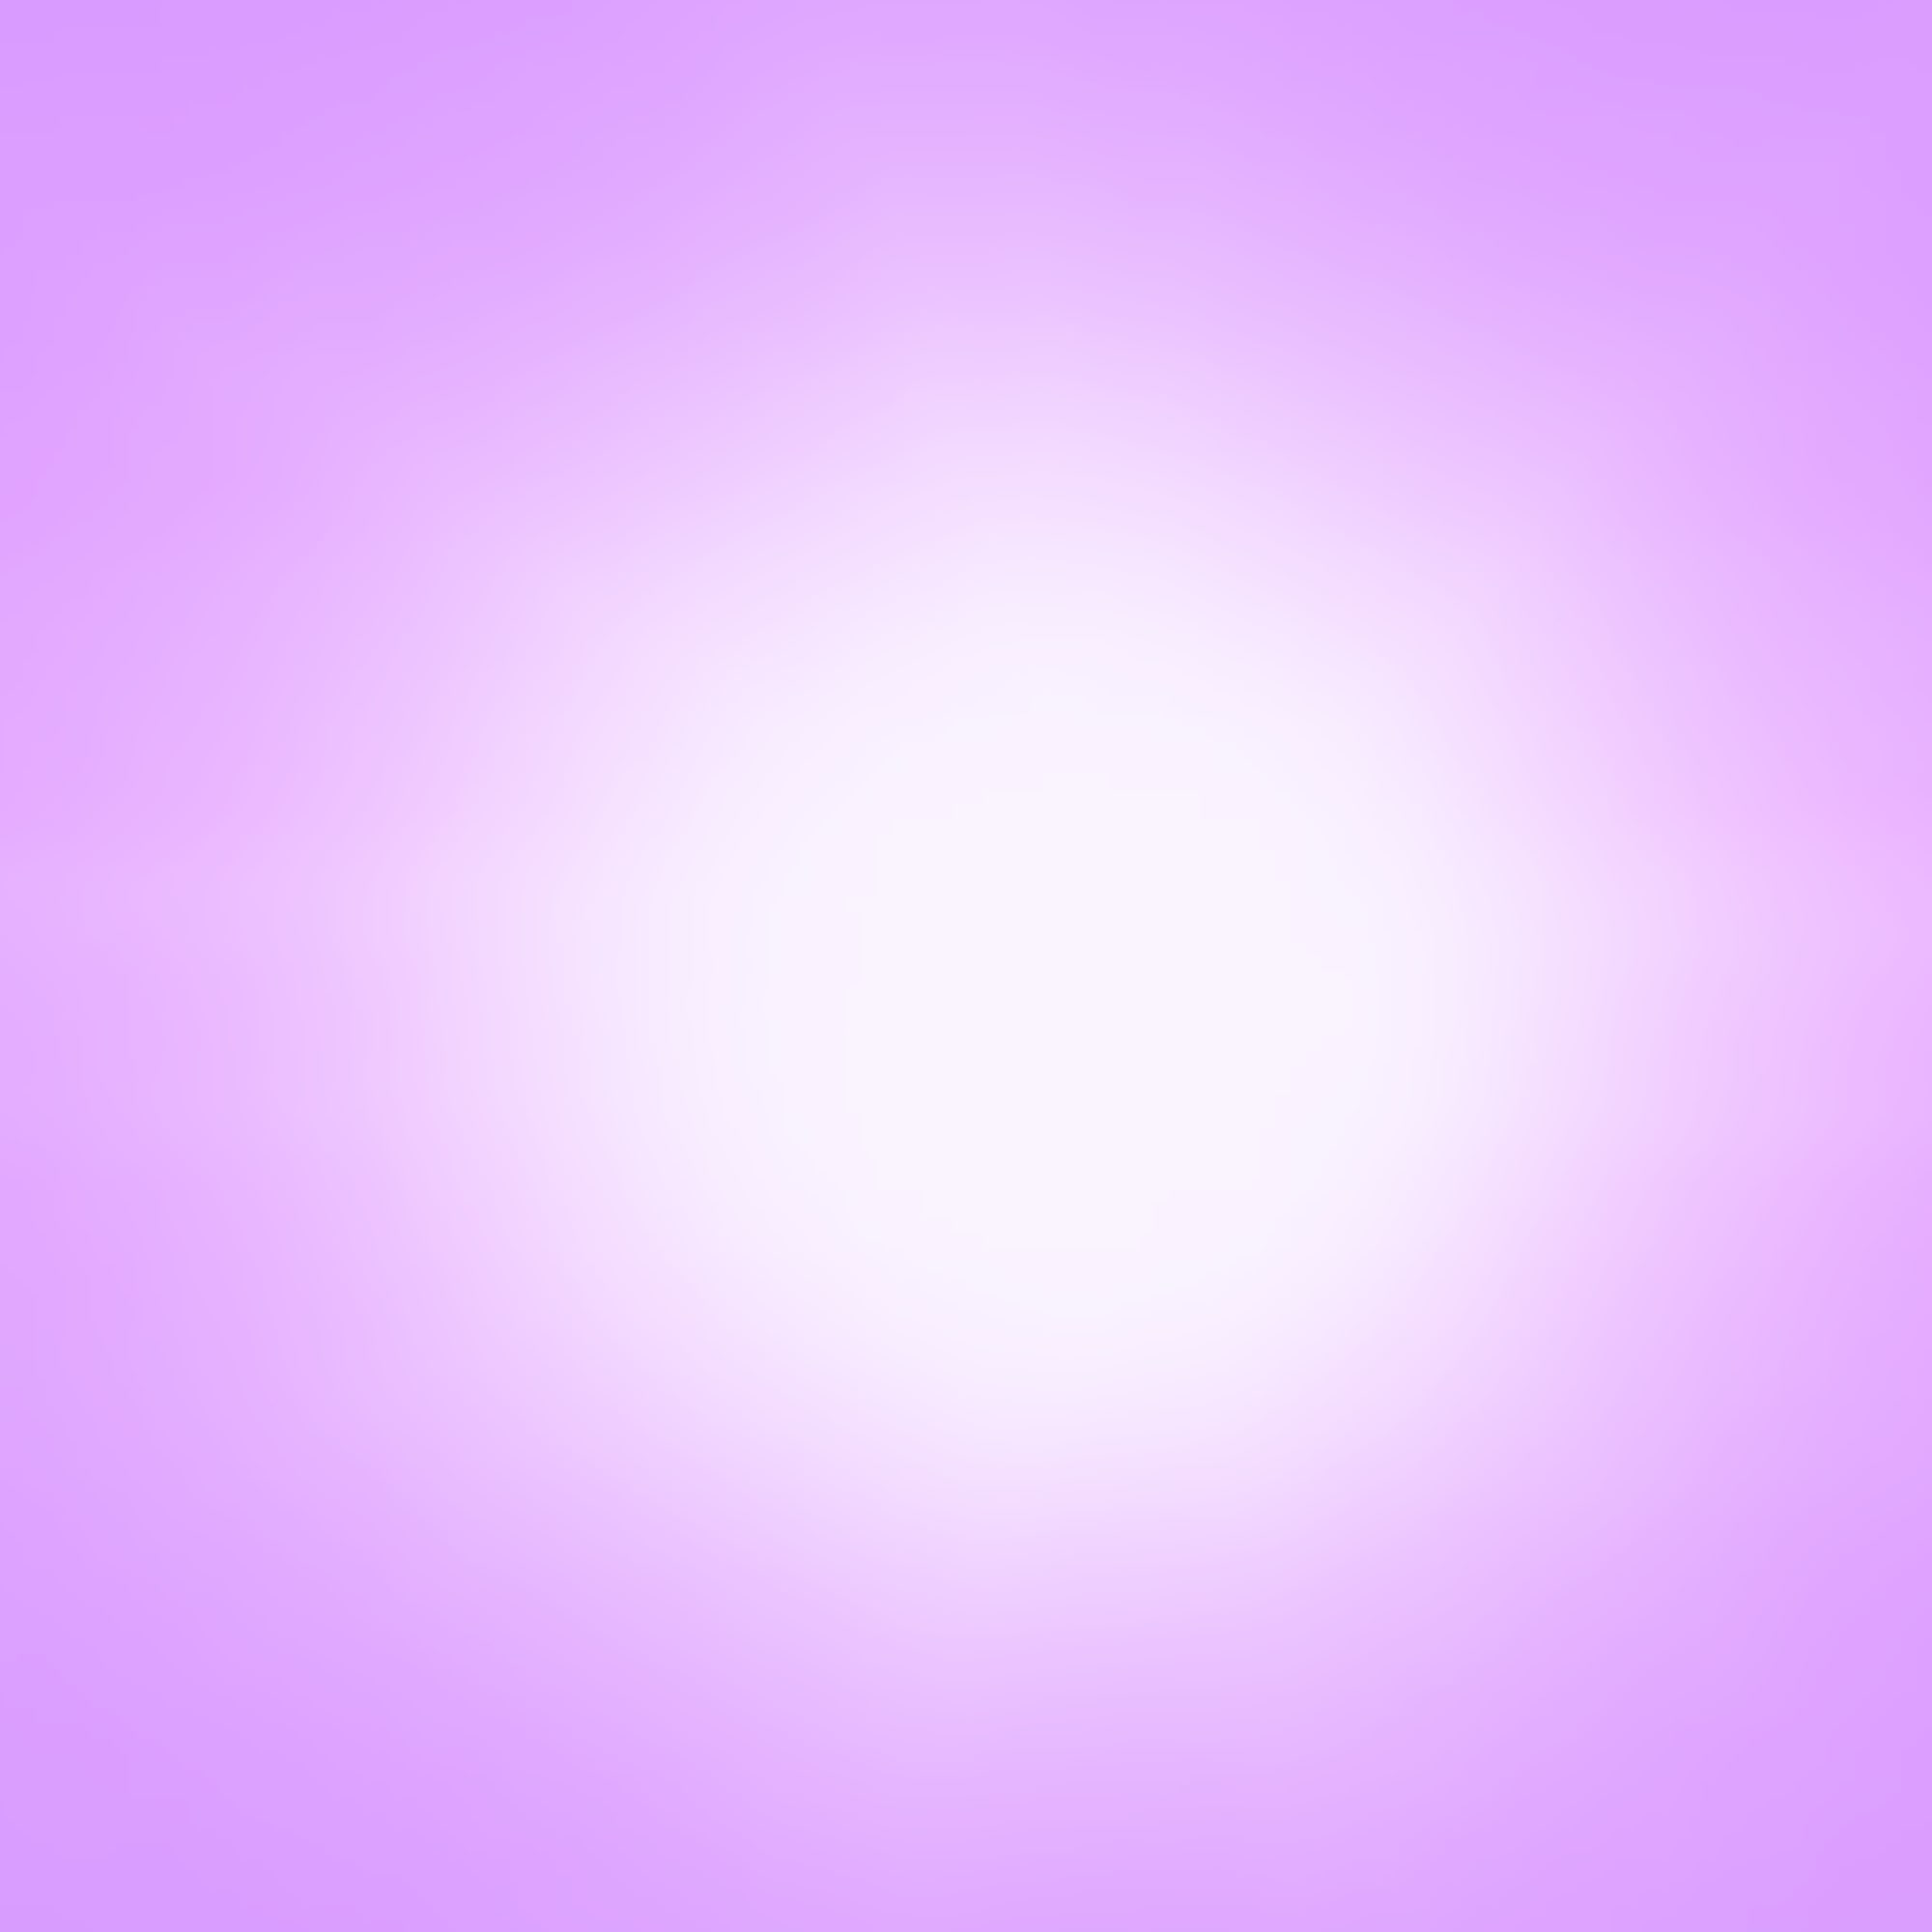 Purple background with a white circle in the middle.